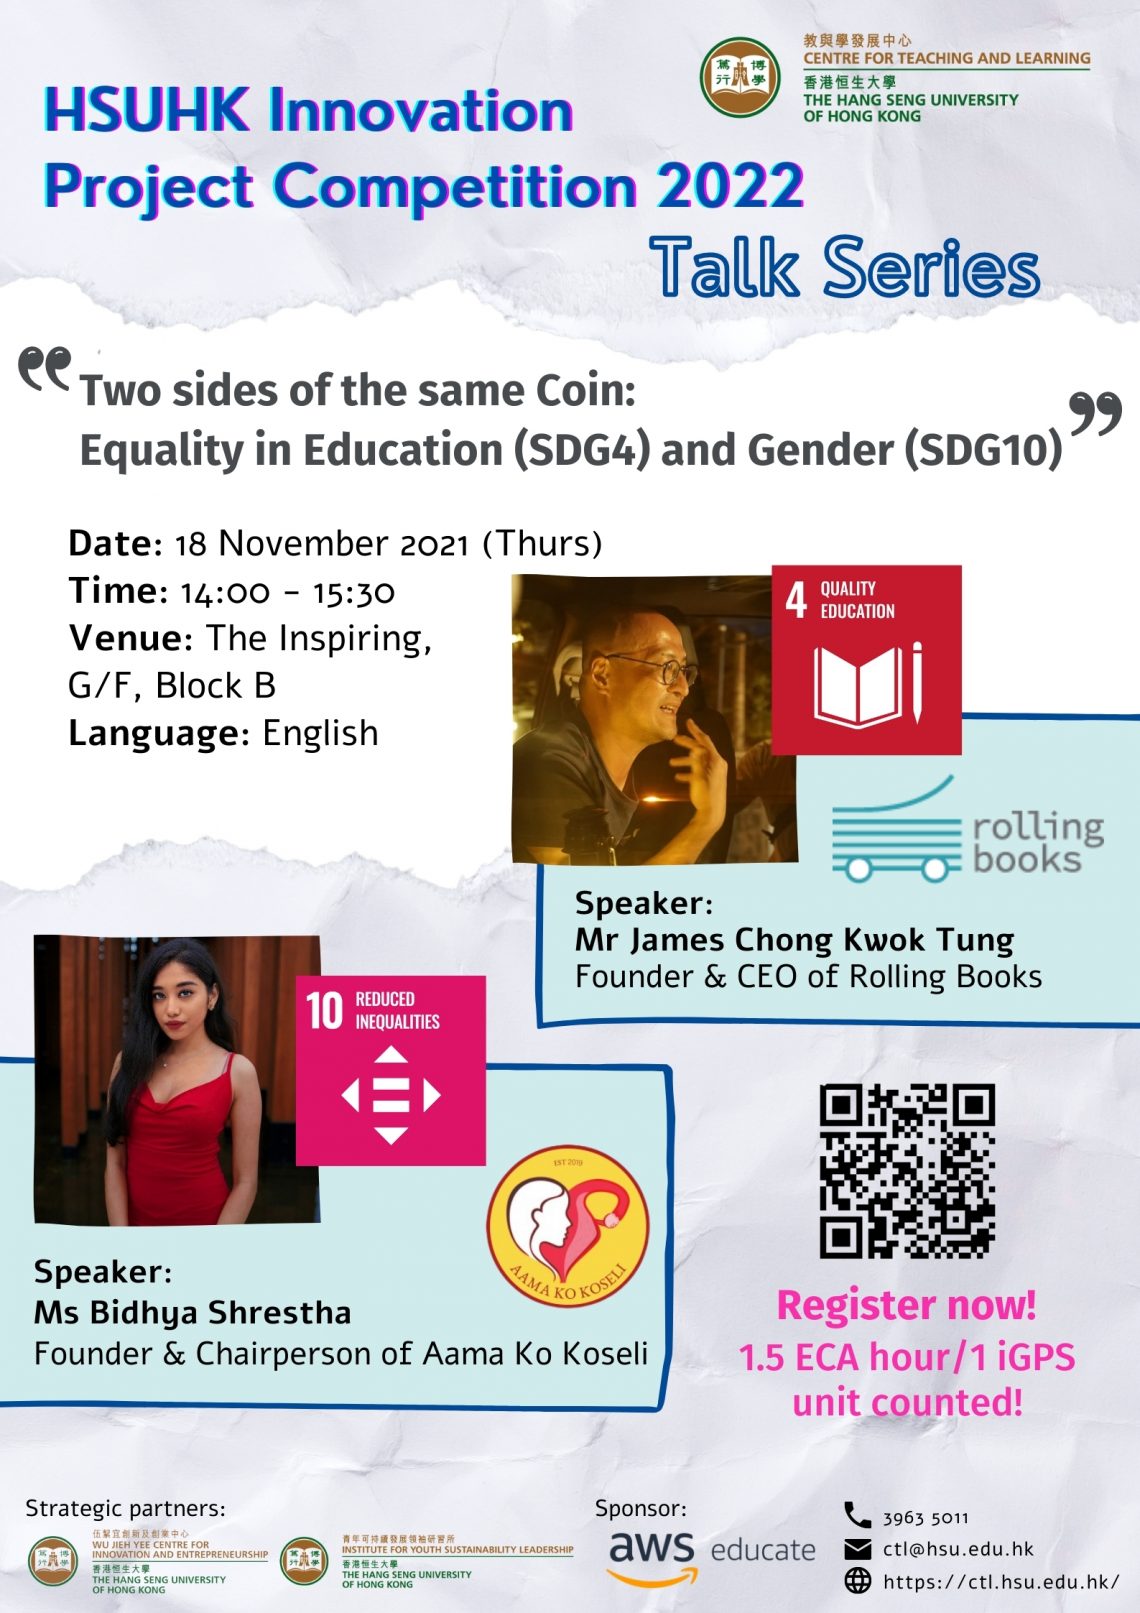 Talk Series 1 SDG 4 (Quality Education) and SDG 10 (Reduced Inequalities)